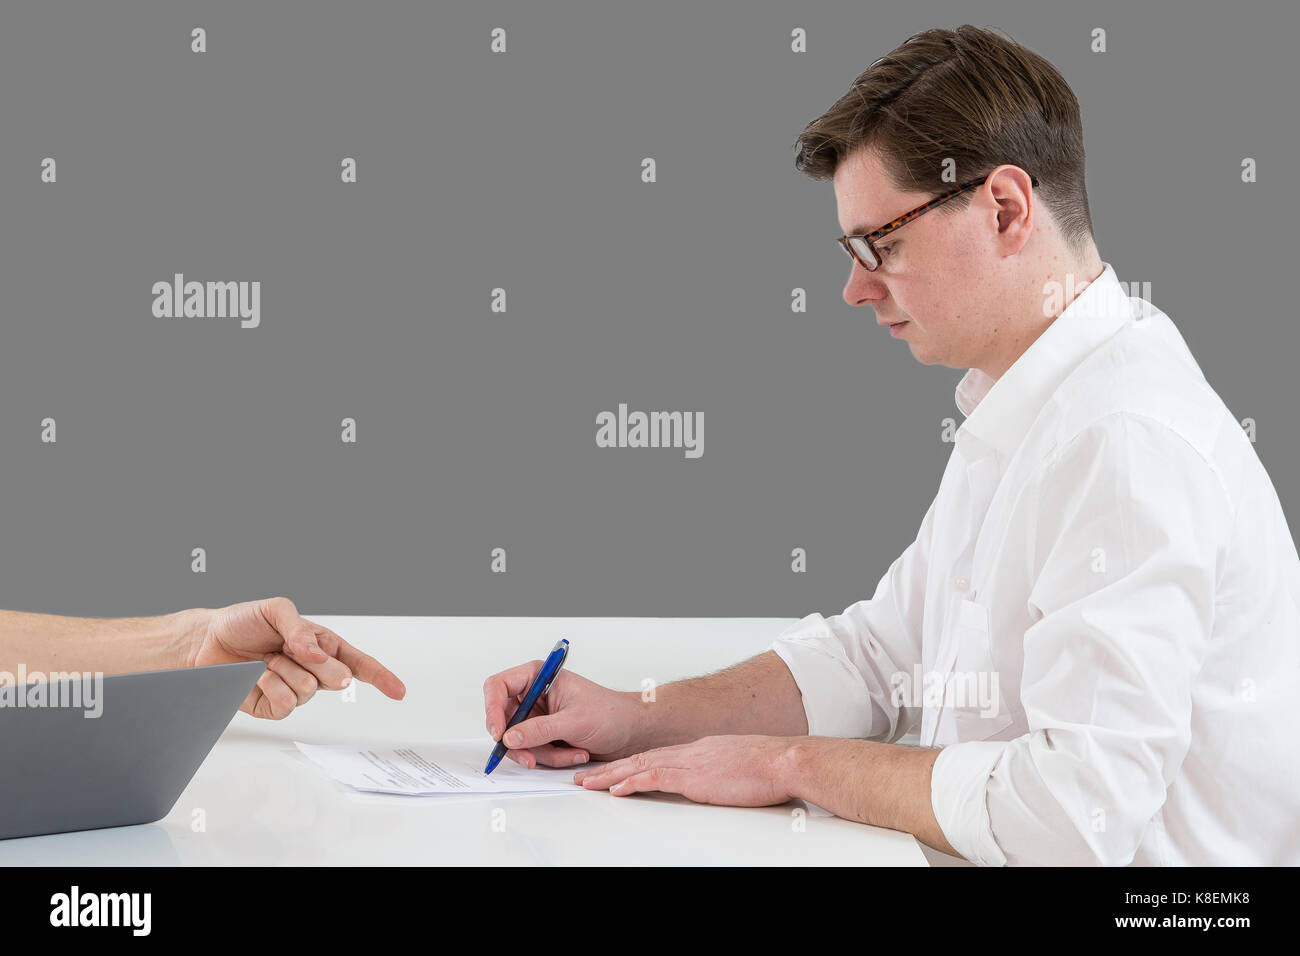 Closeup of male hand pointing where to sign a contract, legal papers or application form. Stock Photo